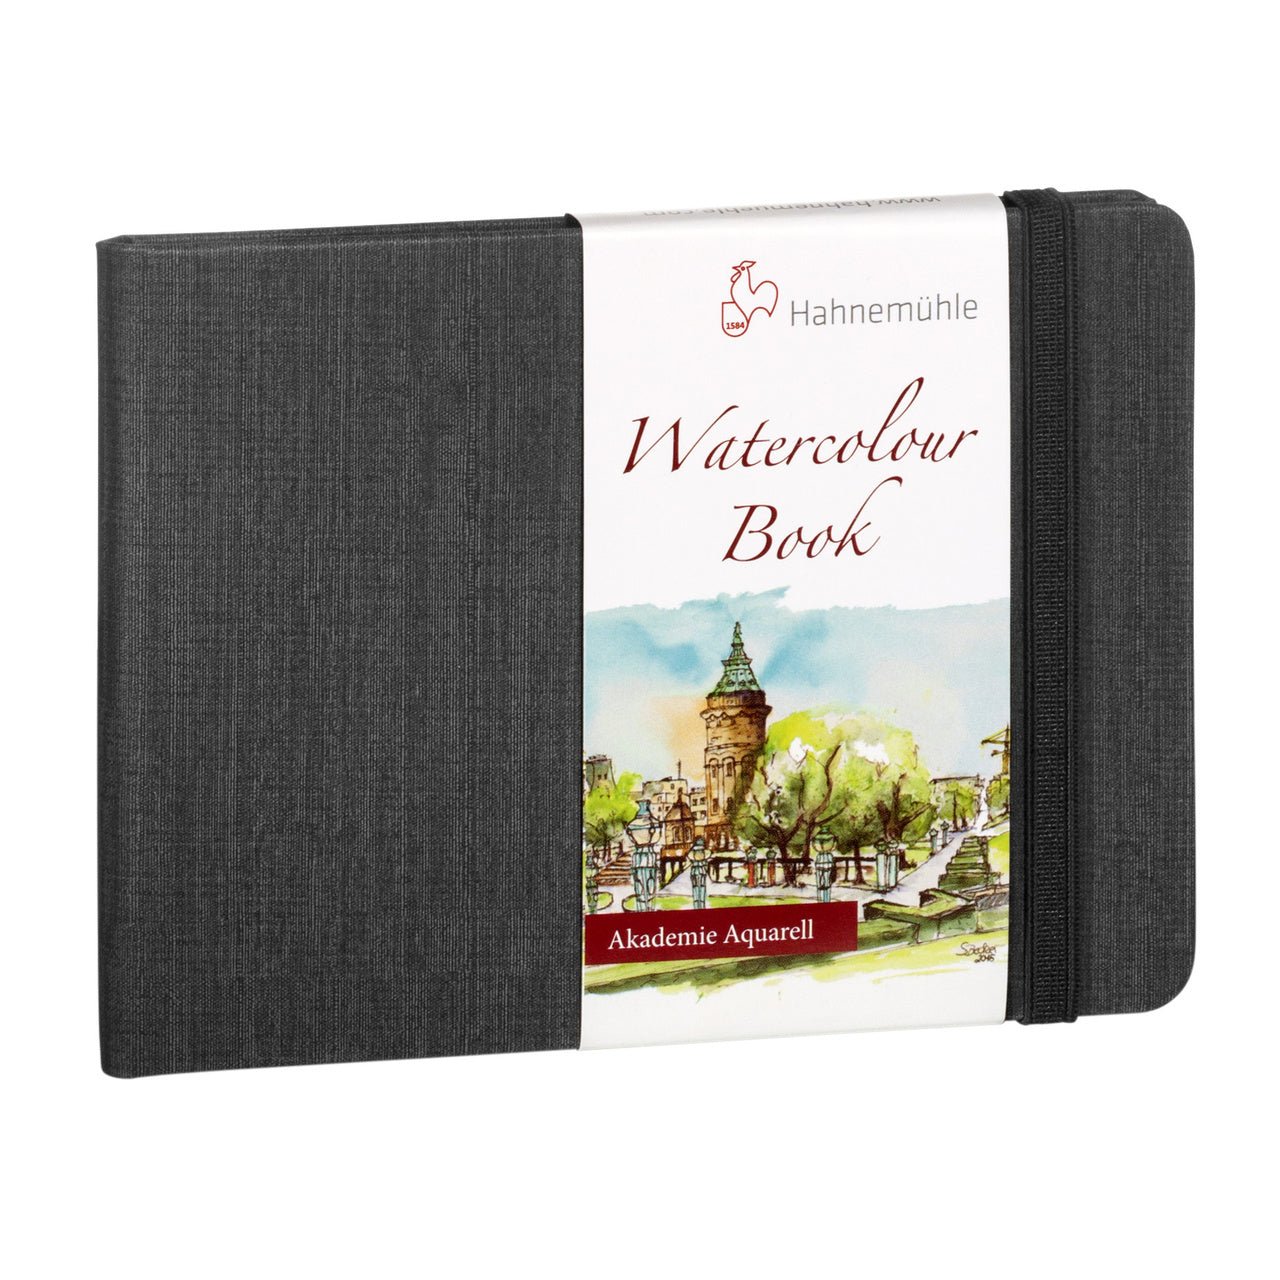 Hahnemuehle Akademie Watercolor Paper Book 5.8 inch x 8.2 inch - Landscape - merriartist.com